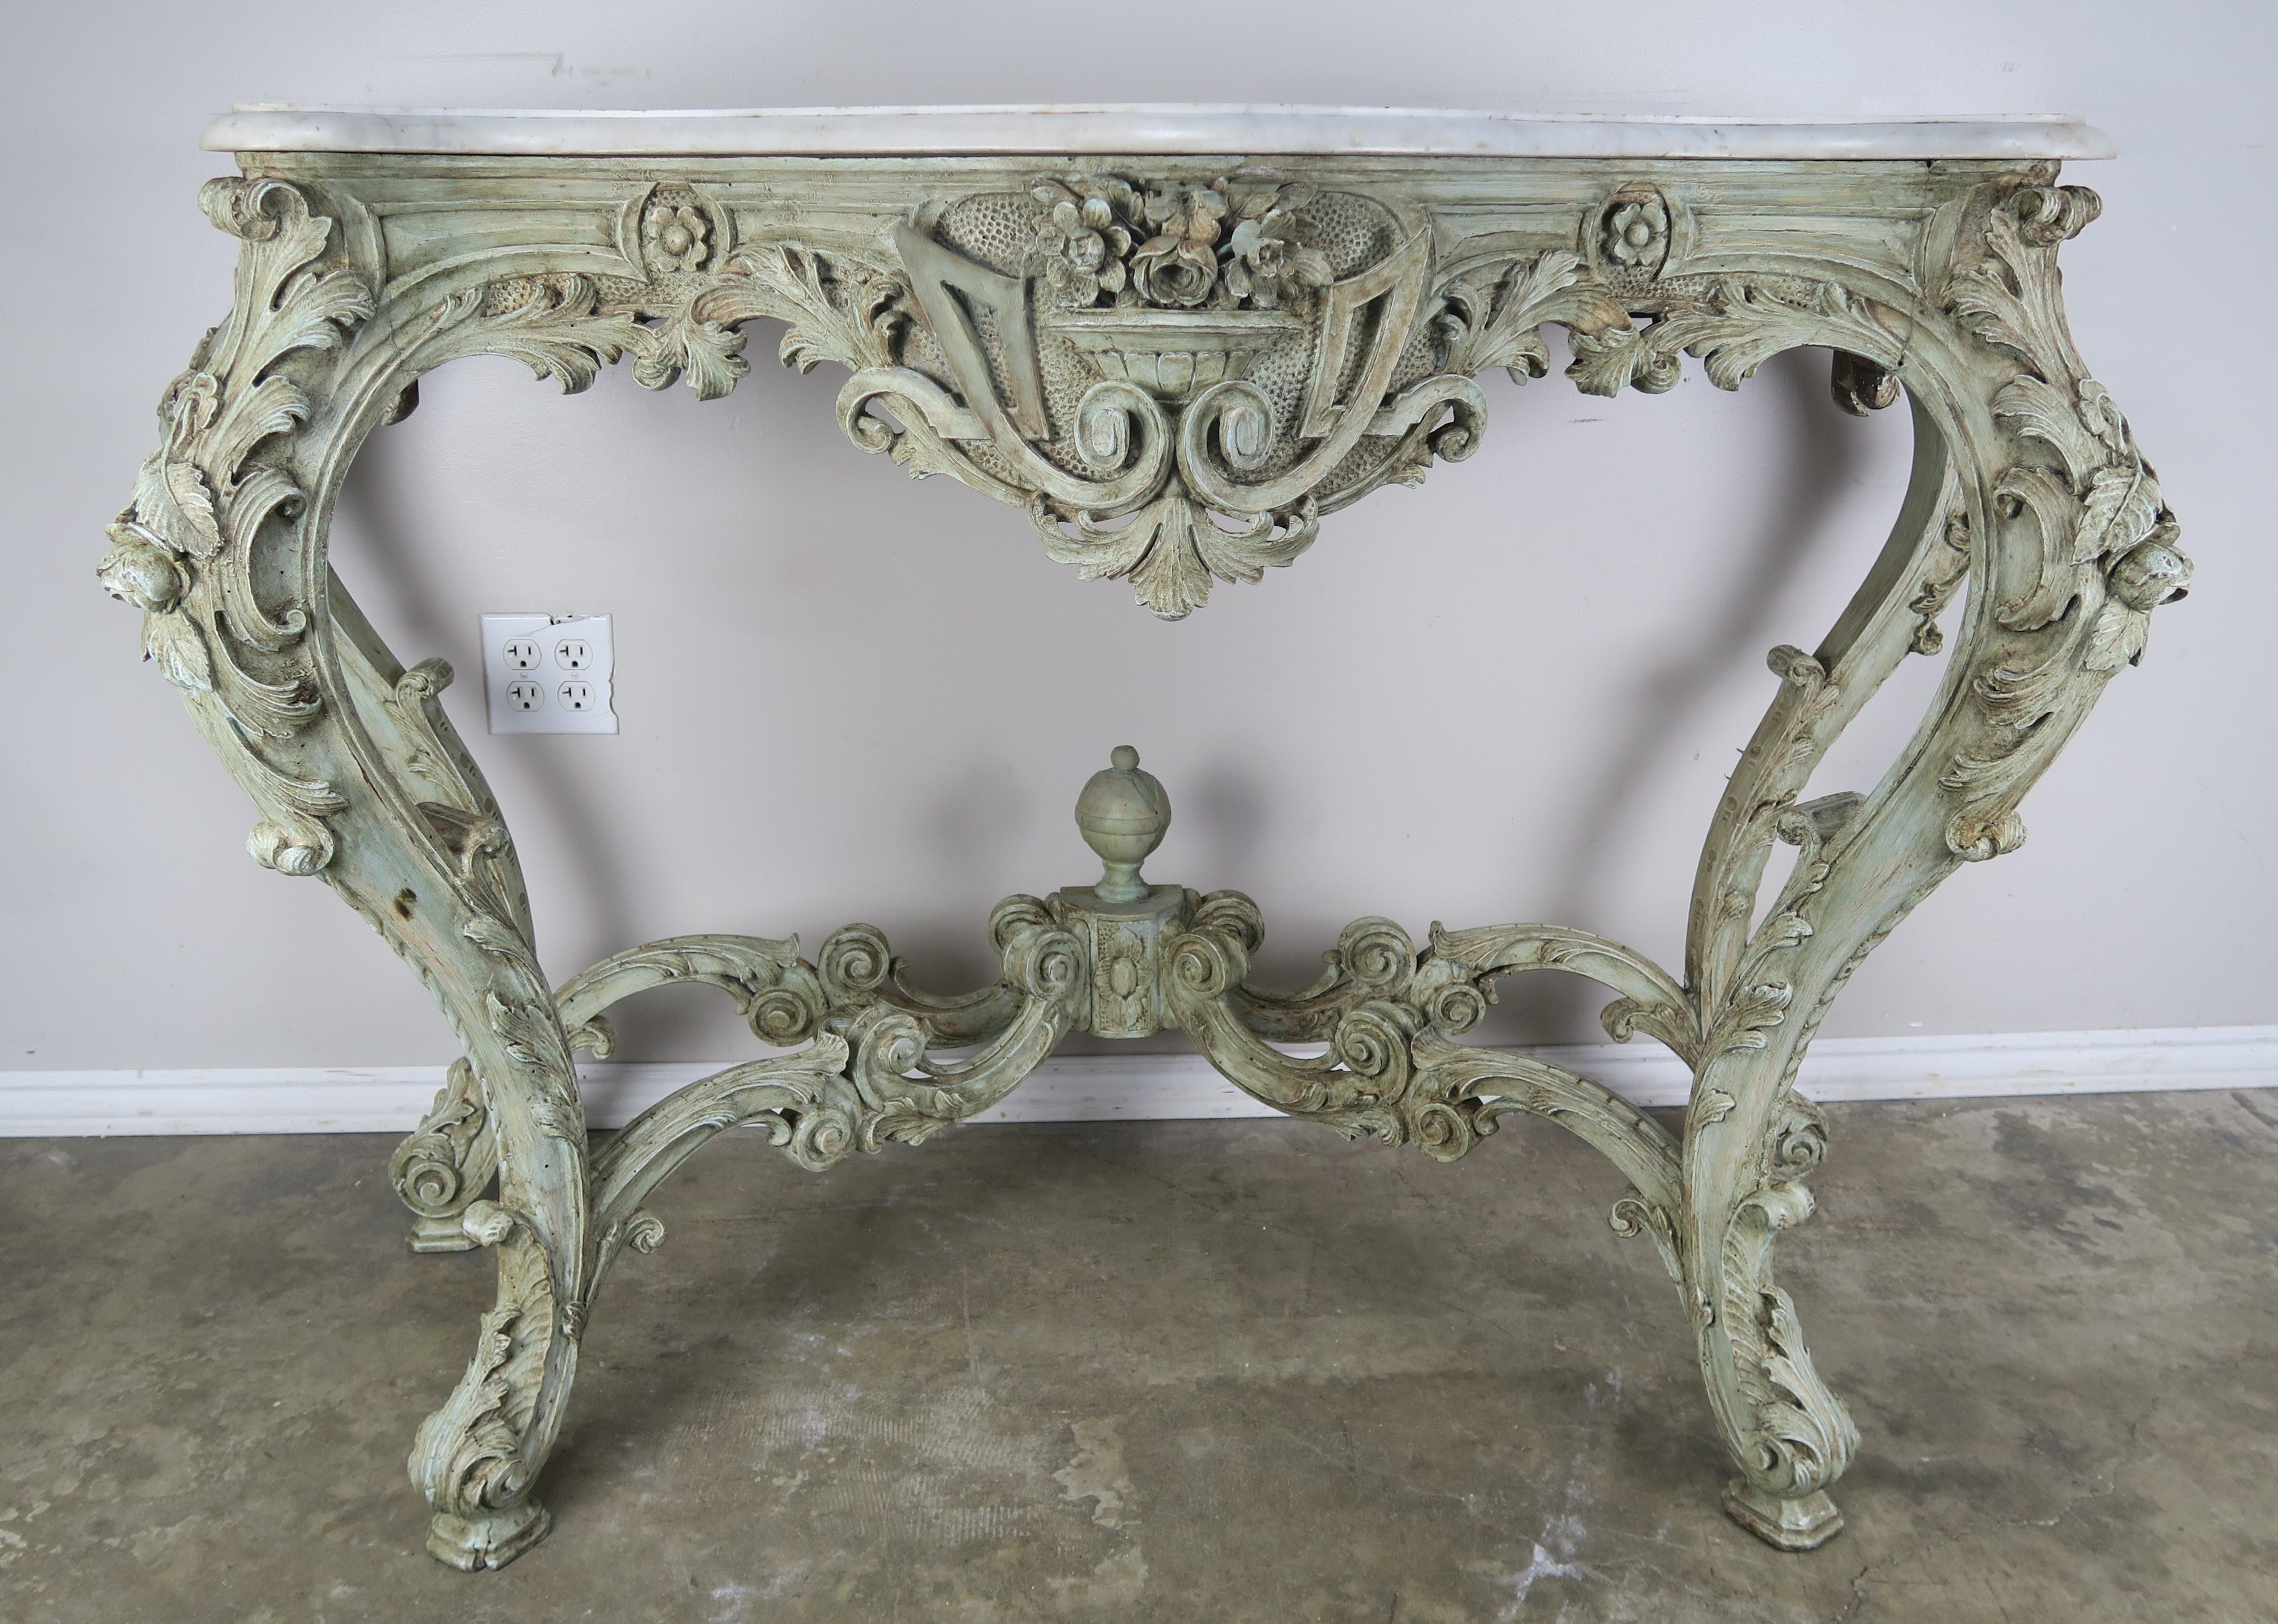 19th century French Rococo style painted console with Carrara marble top. The console is ornately carved with a center flower urn and scrolled acanthus leaves carved throughout. The console is painted in a soft green celadon coloration. The table